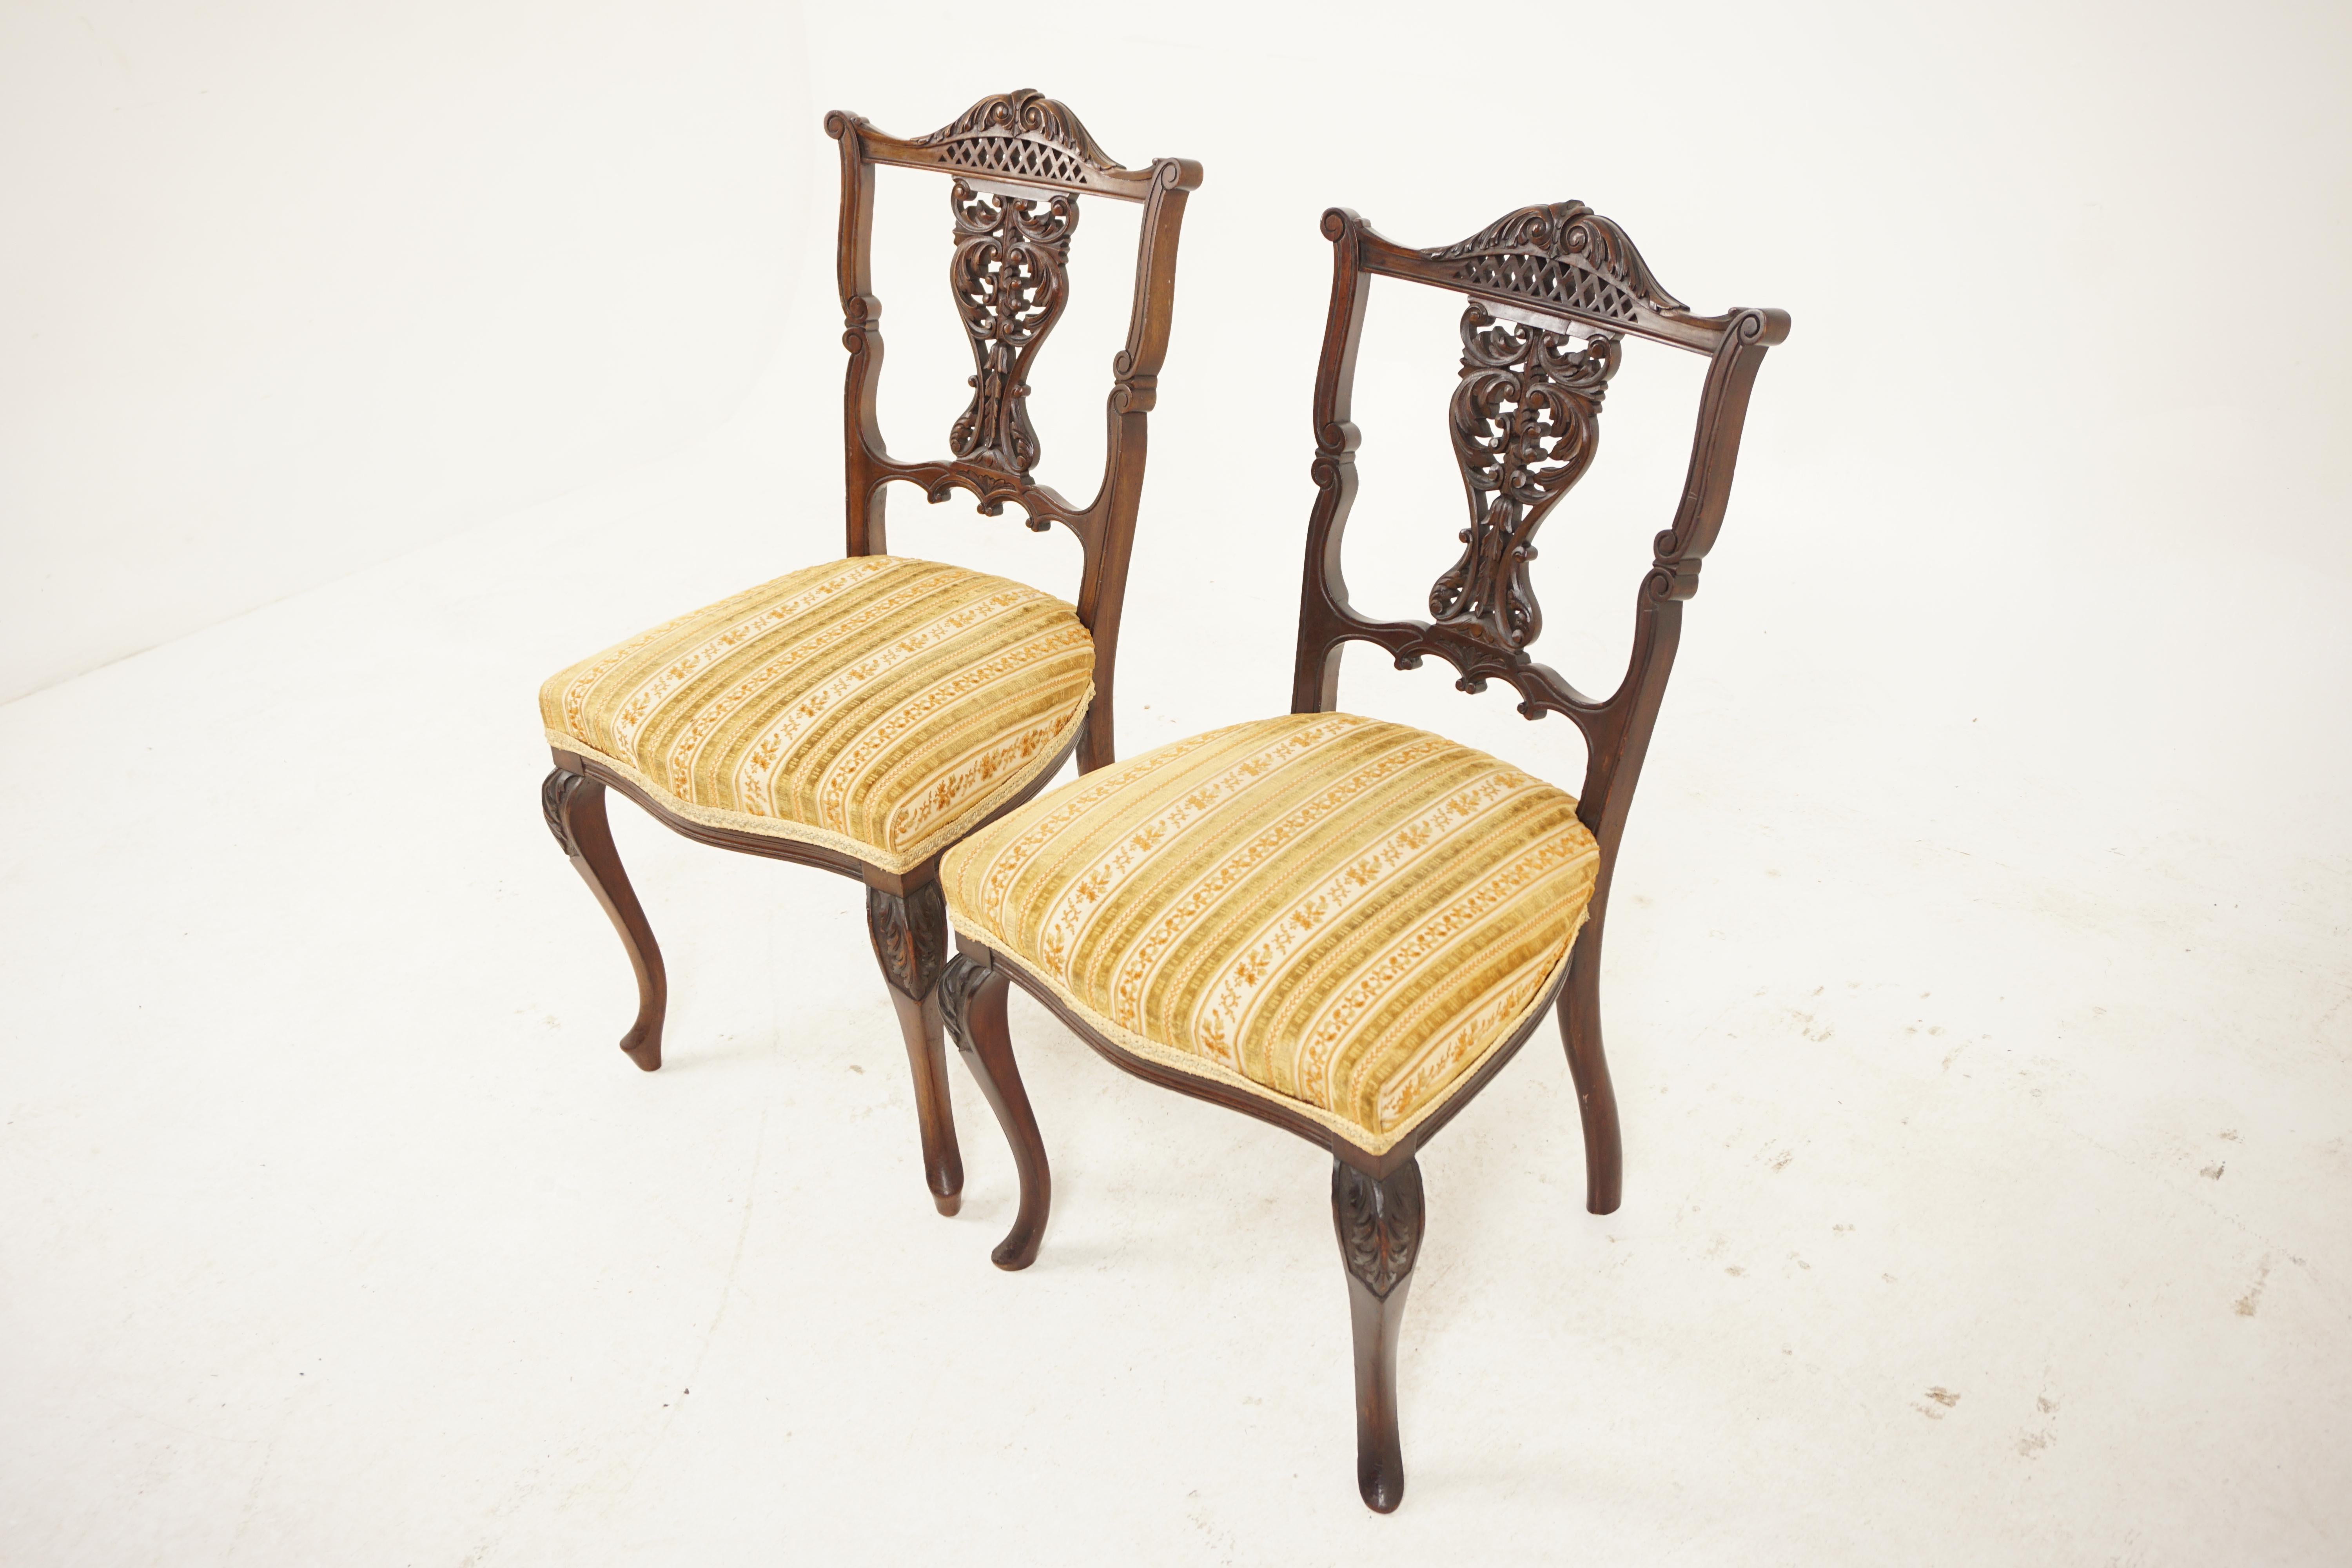 Pair of Victorian Carved Walnut Side Chairs, Occasional Chairs, Scotland 1890, H503

Scotland 1890
Solid Walnut
Original Finish
Having a quality carved top rail
Open pierced carved splat to the center, upholstered seat
Standing on carved cabriole